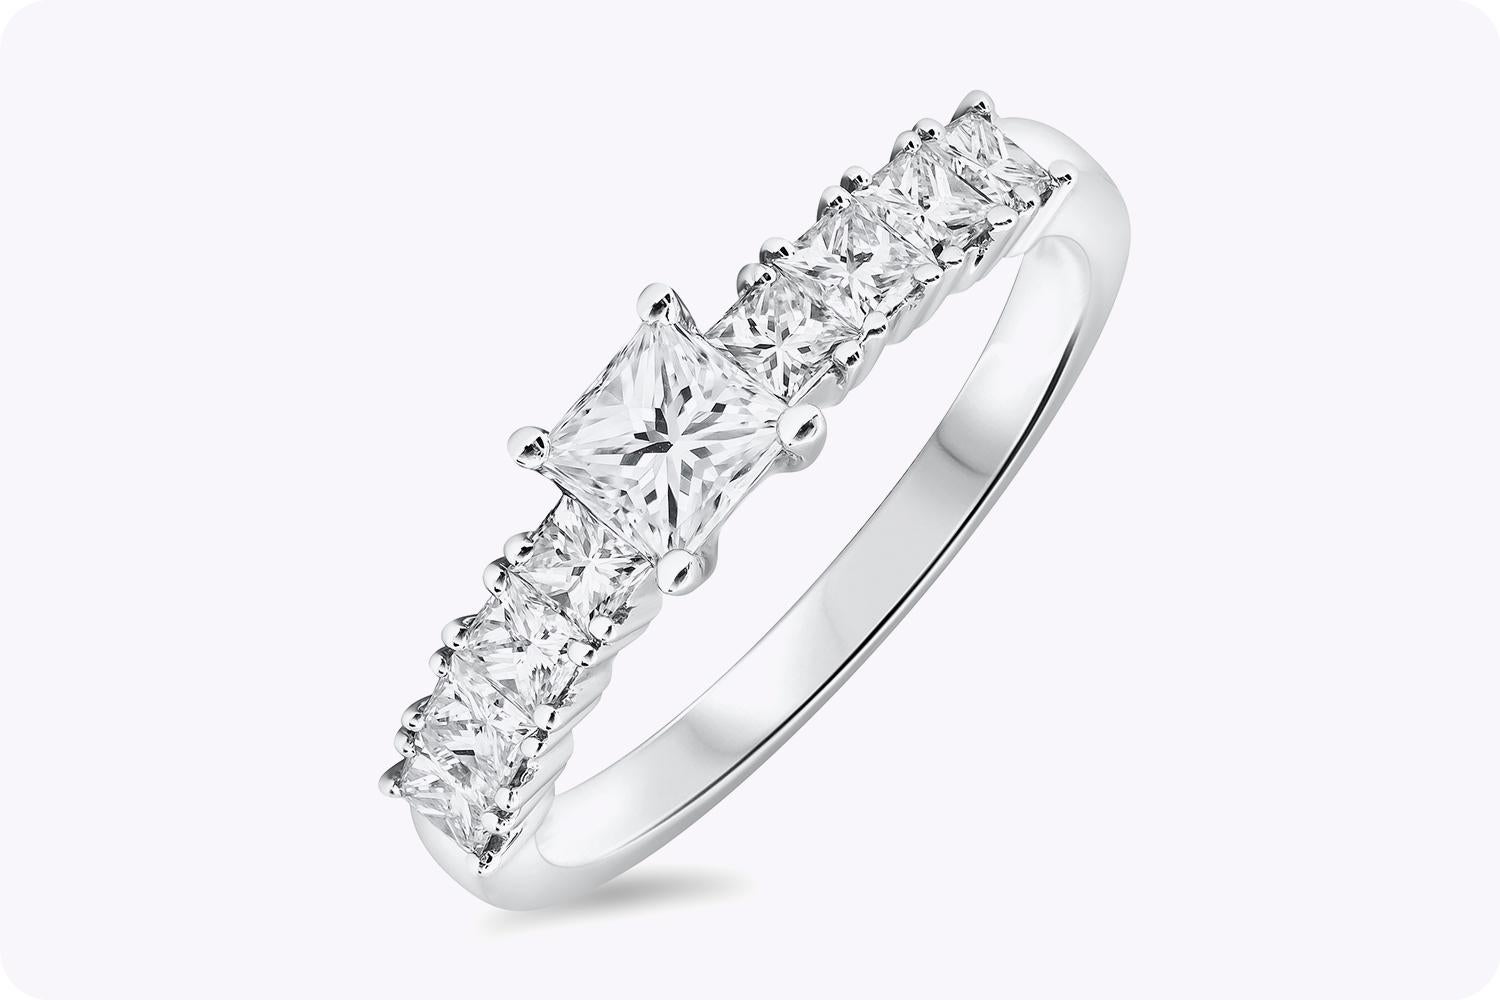 A unique and lustrous engagement ring showcasing a simple 0.39 carat princess cut diamond, accented by 4 smaller princess cut diamonds on either side. Accent princess cut diamonds weigh 0.67 carats total and are perfectly-matched. Set in polished 18